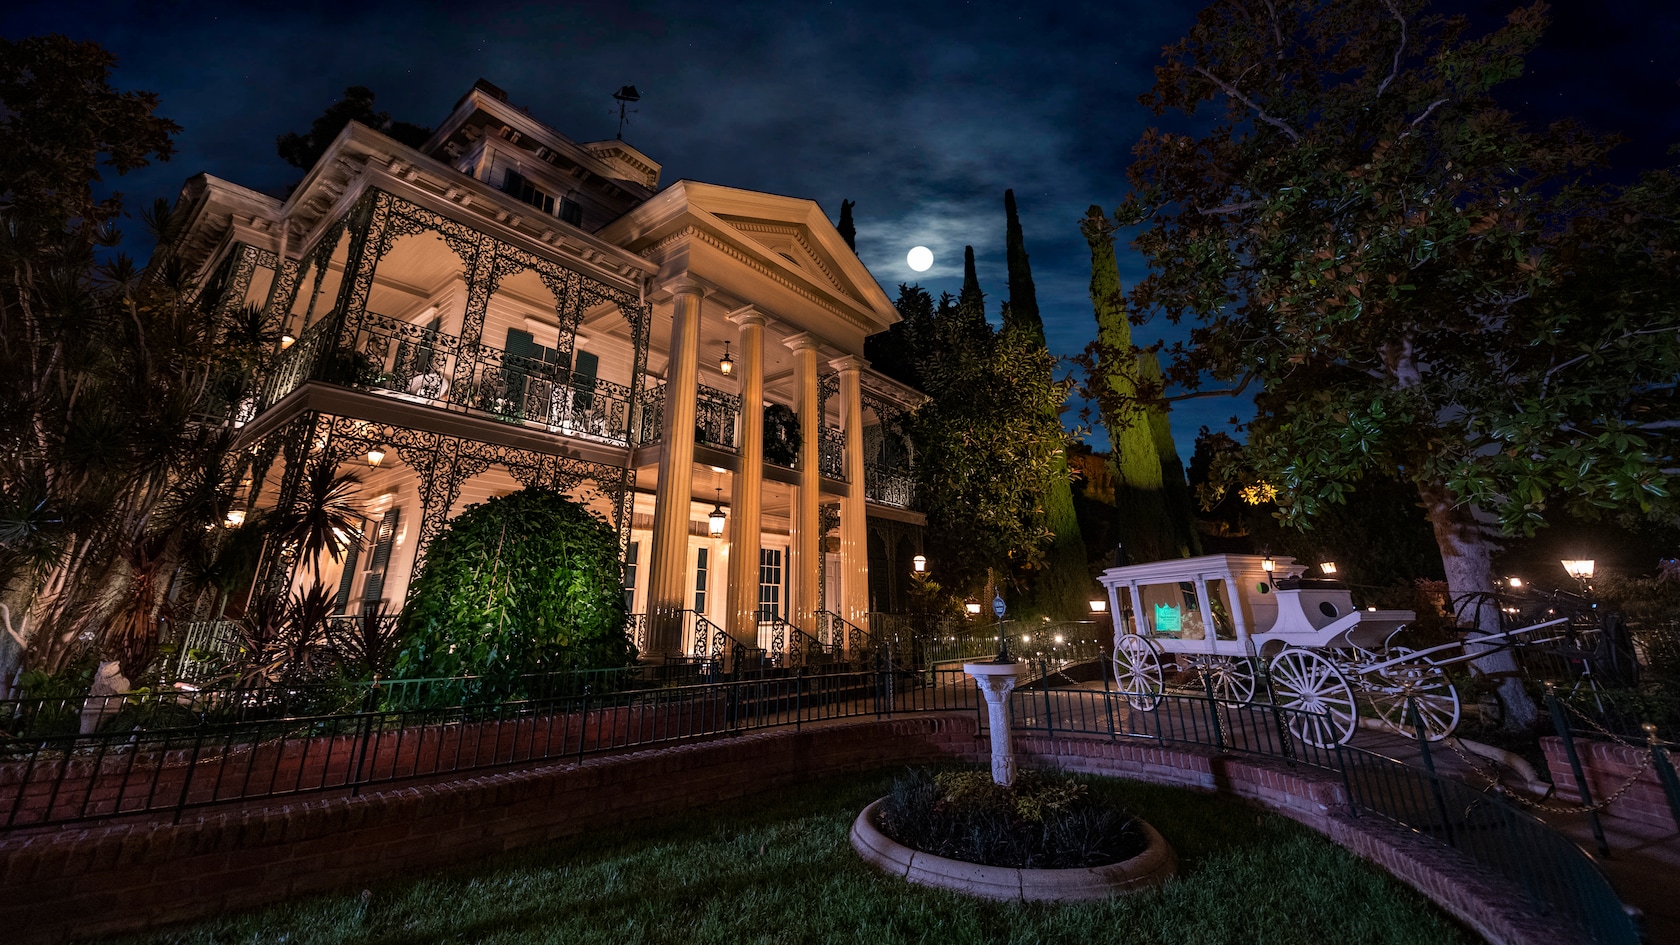 Under moonlit skies, a horse drawn carriage sits outside the eerily illuminated exterior of the Haunted Mansion 